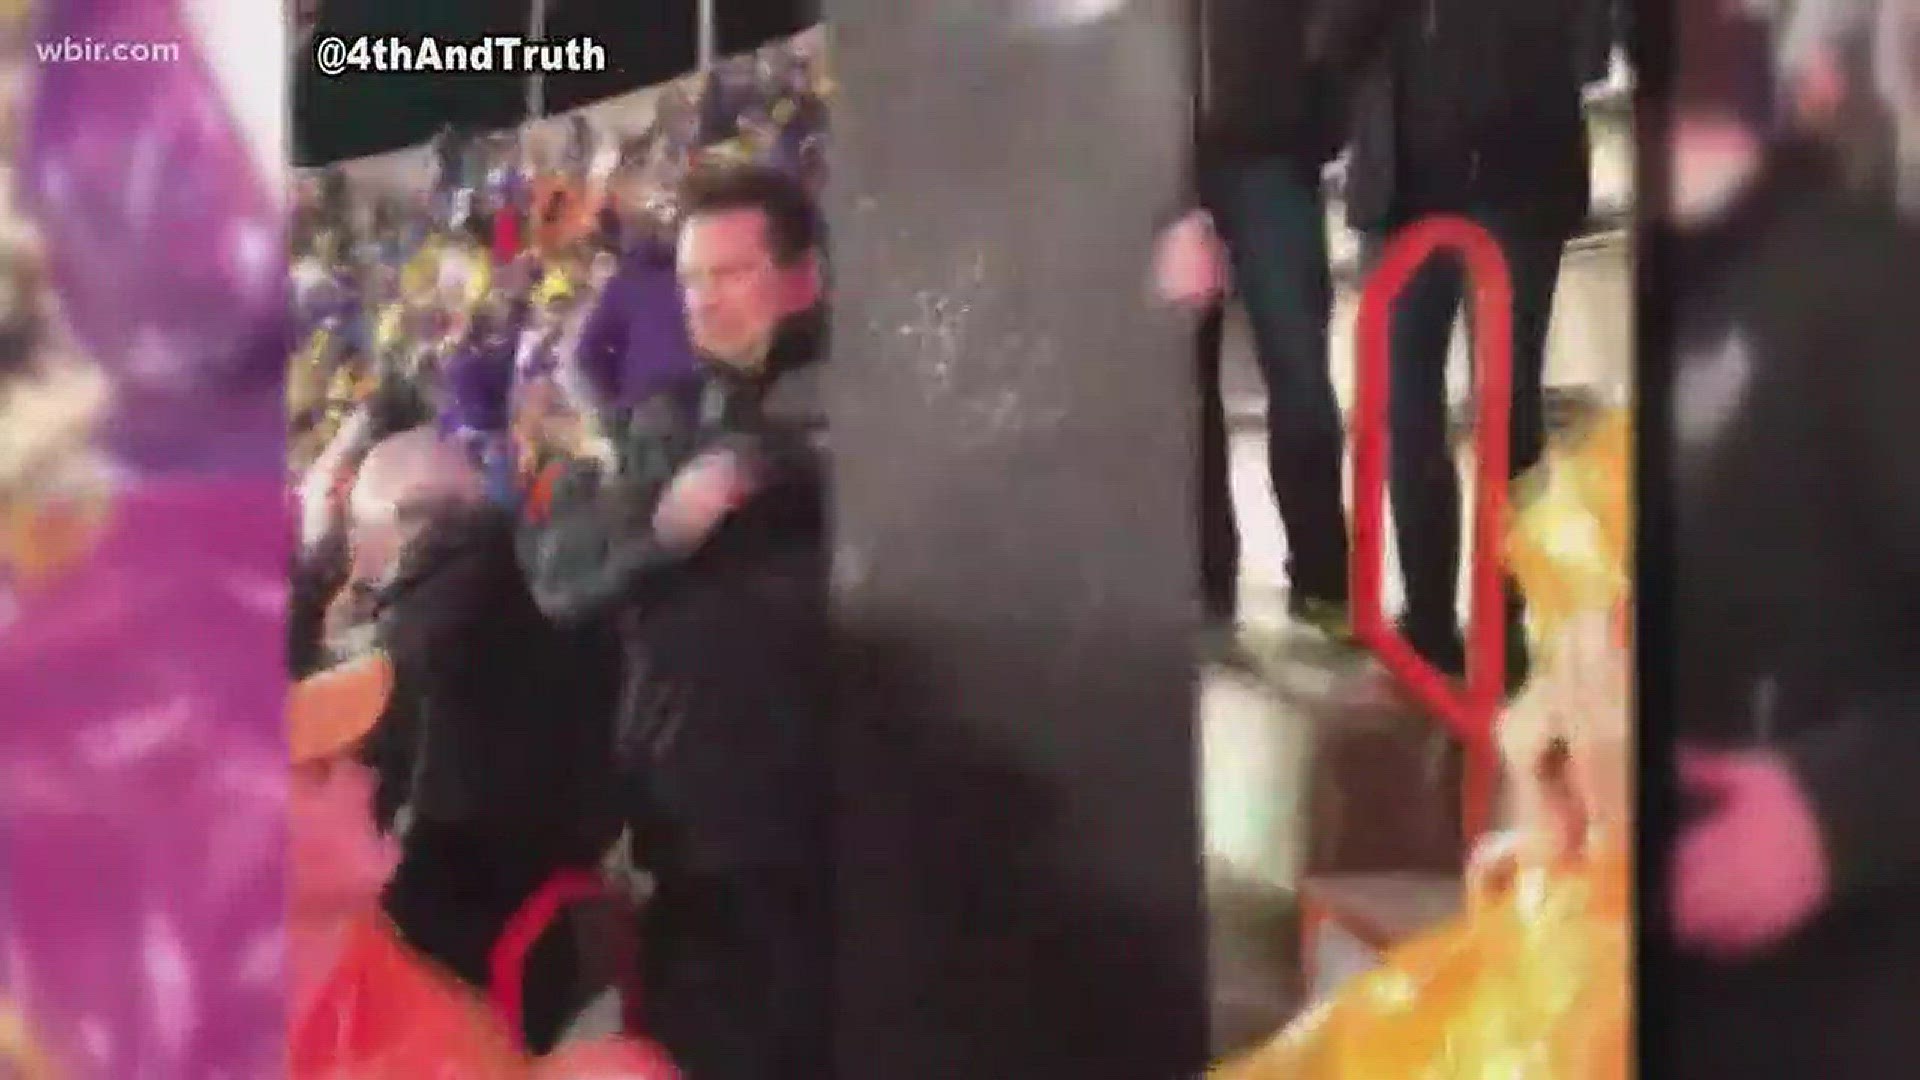 A piece of metal flew off the scoreboard at the Vols vs. LSU game Saturday evening and hit a fan.